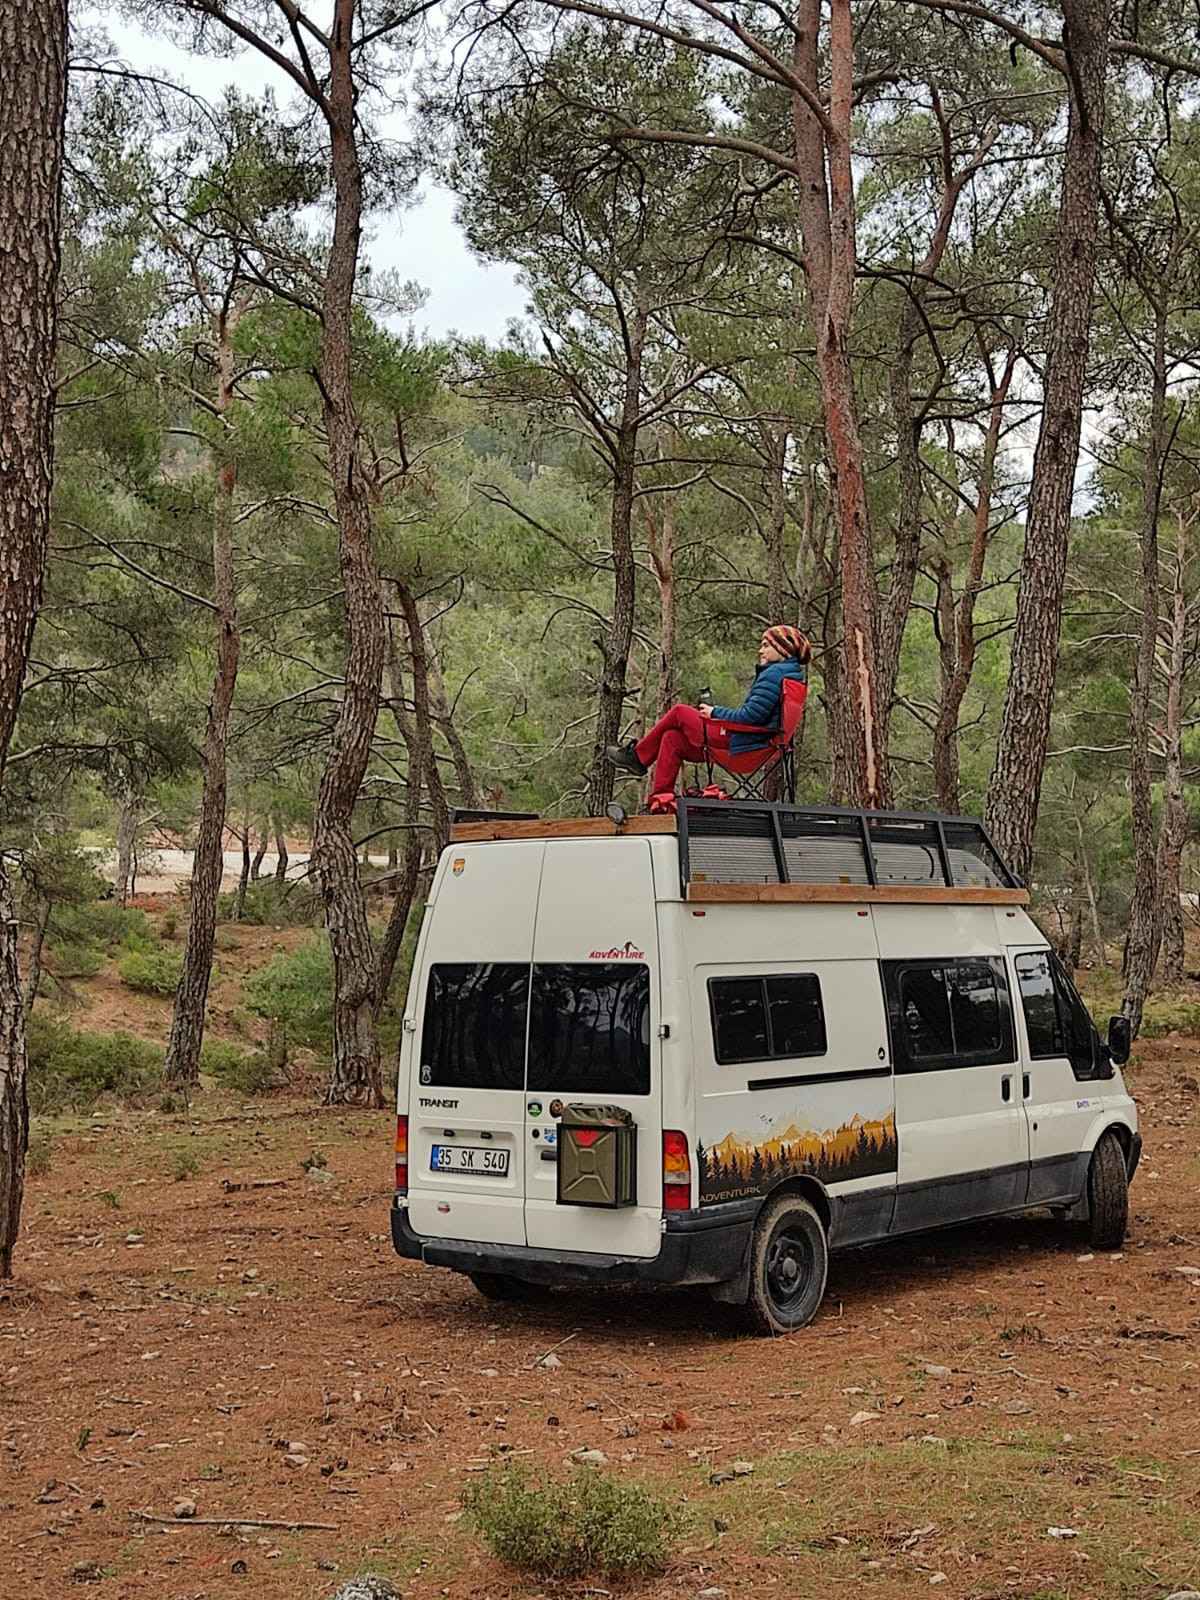 A Ford Campervan called Mascott and for hire in Izmir, Turkey